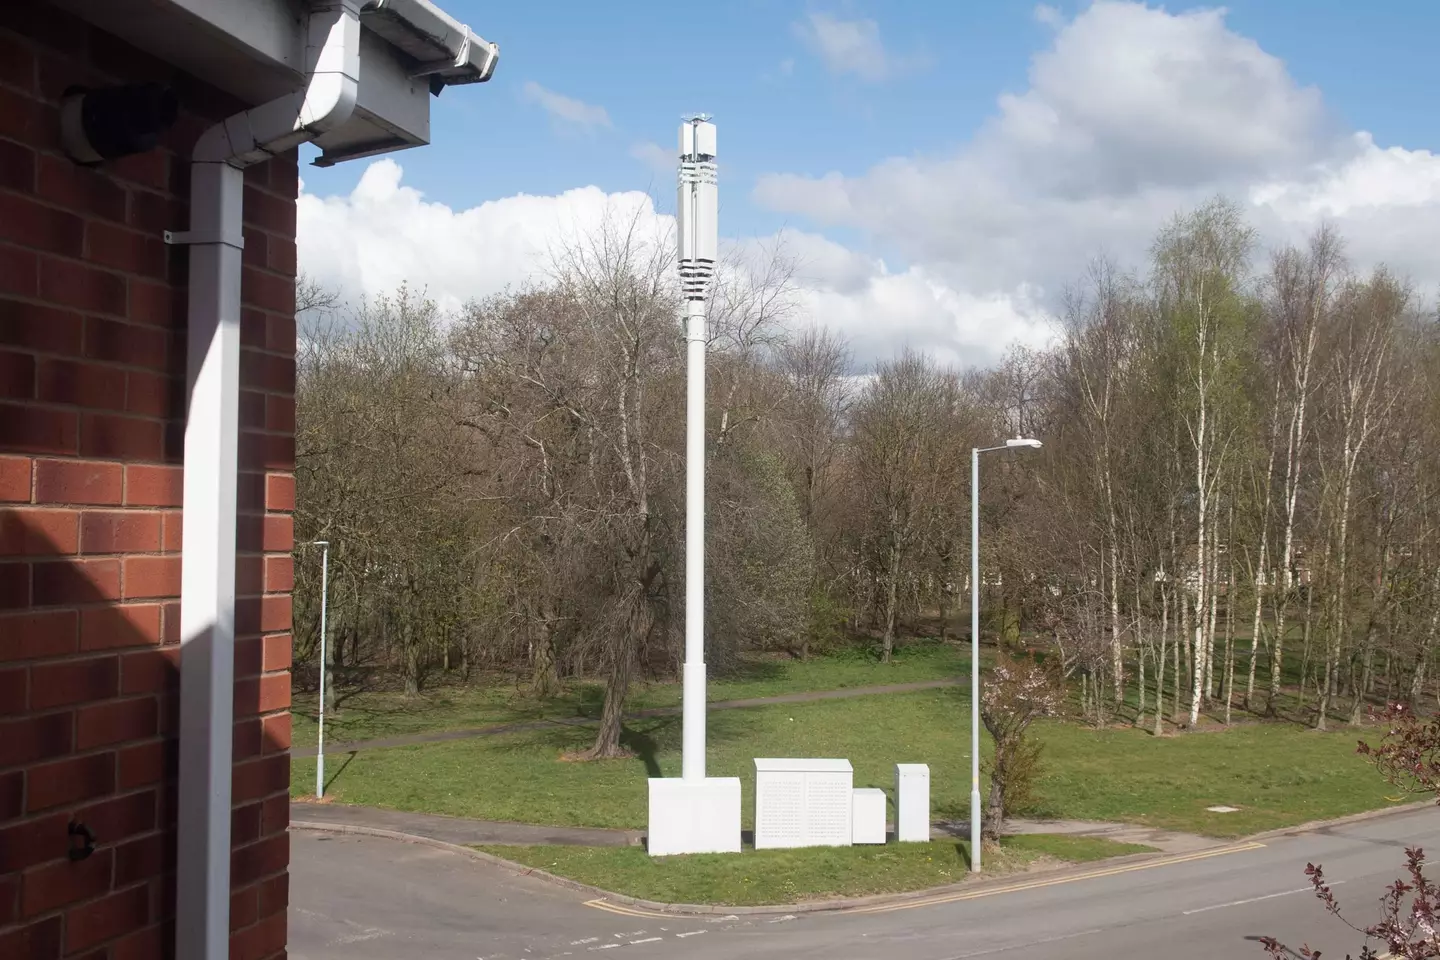 Residents claim they weren't notified about the mast being erected, yet the City of Wolverhampton Council states the proper procedures were followed.